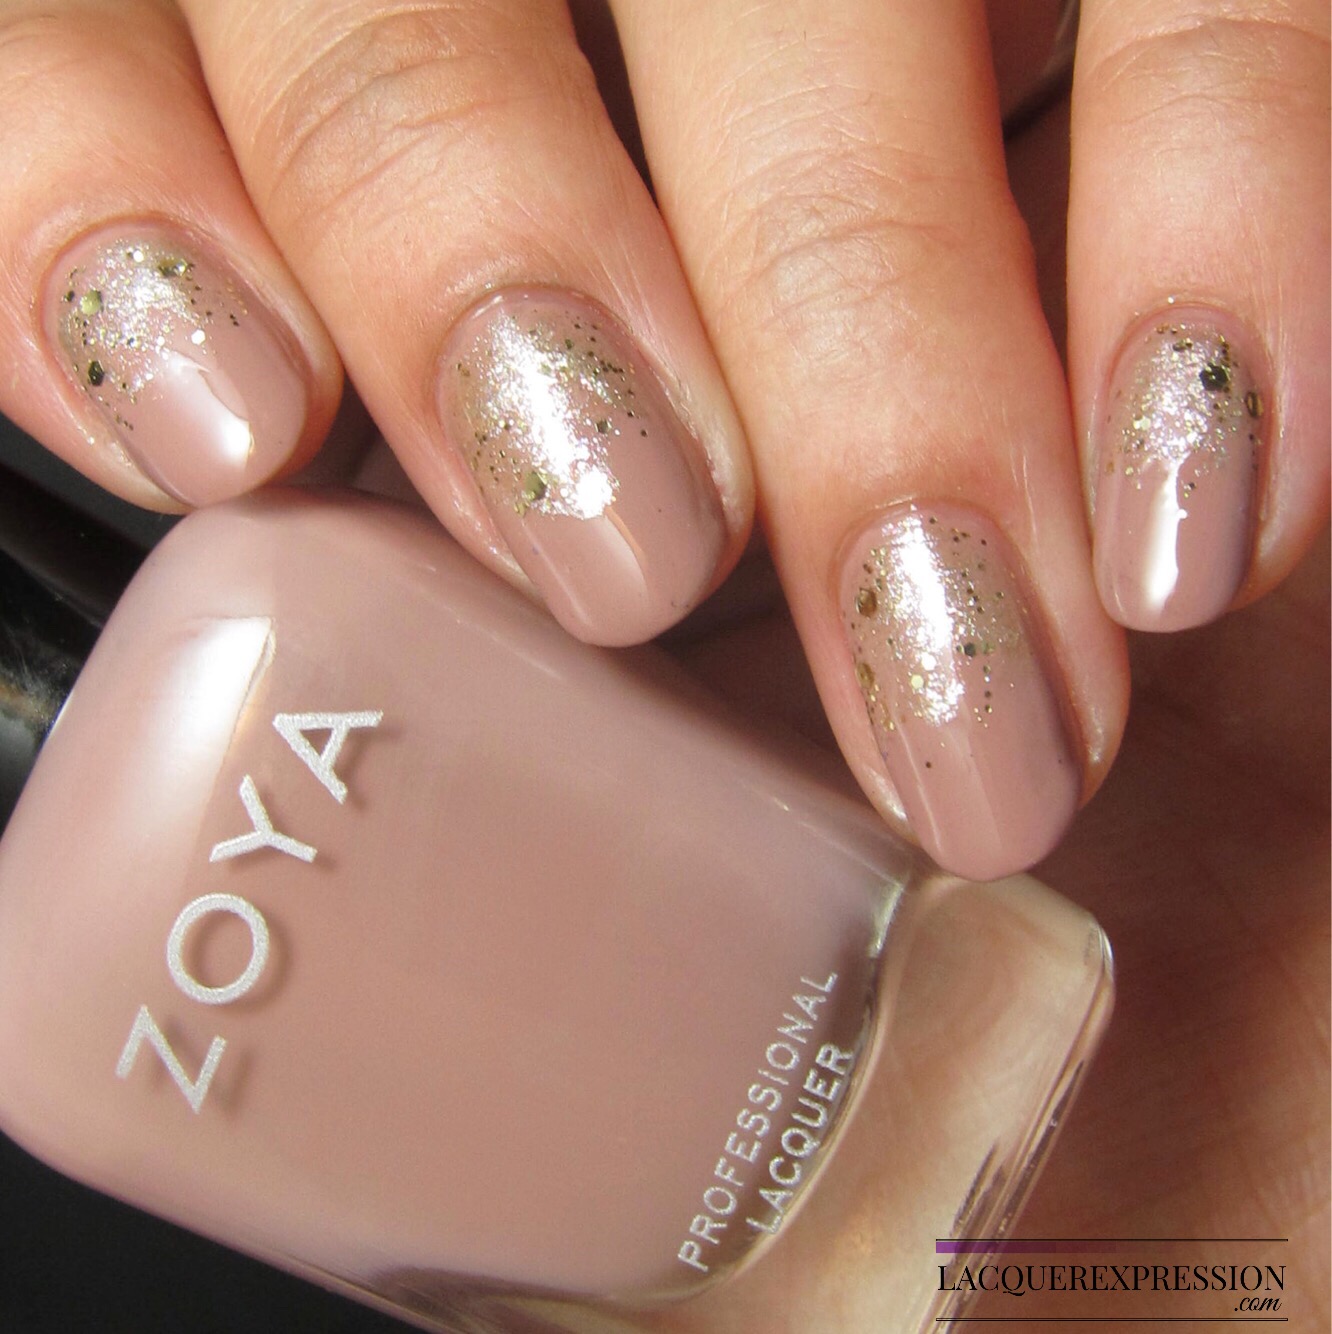 Step-by-Step Nail Art Thursday - Gold Glitter Gradient Over Neutral Base -  LacquerExpression